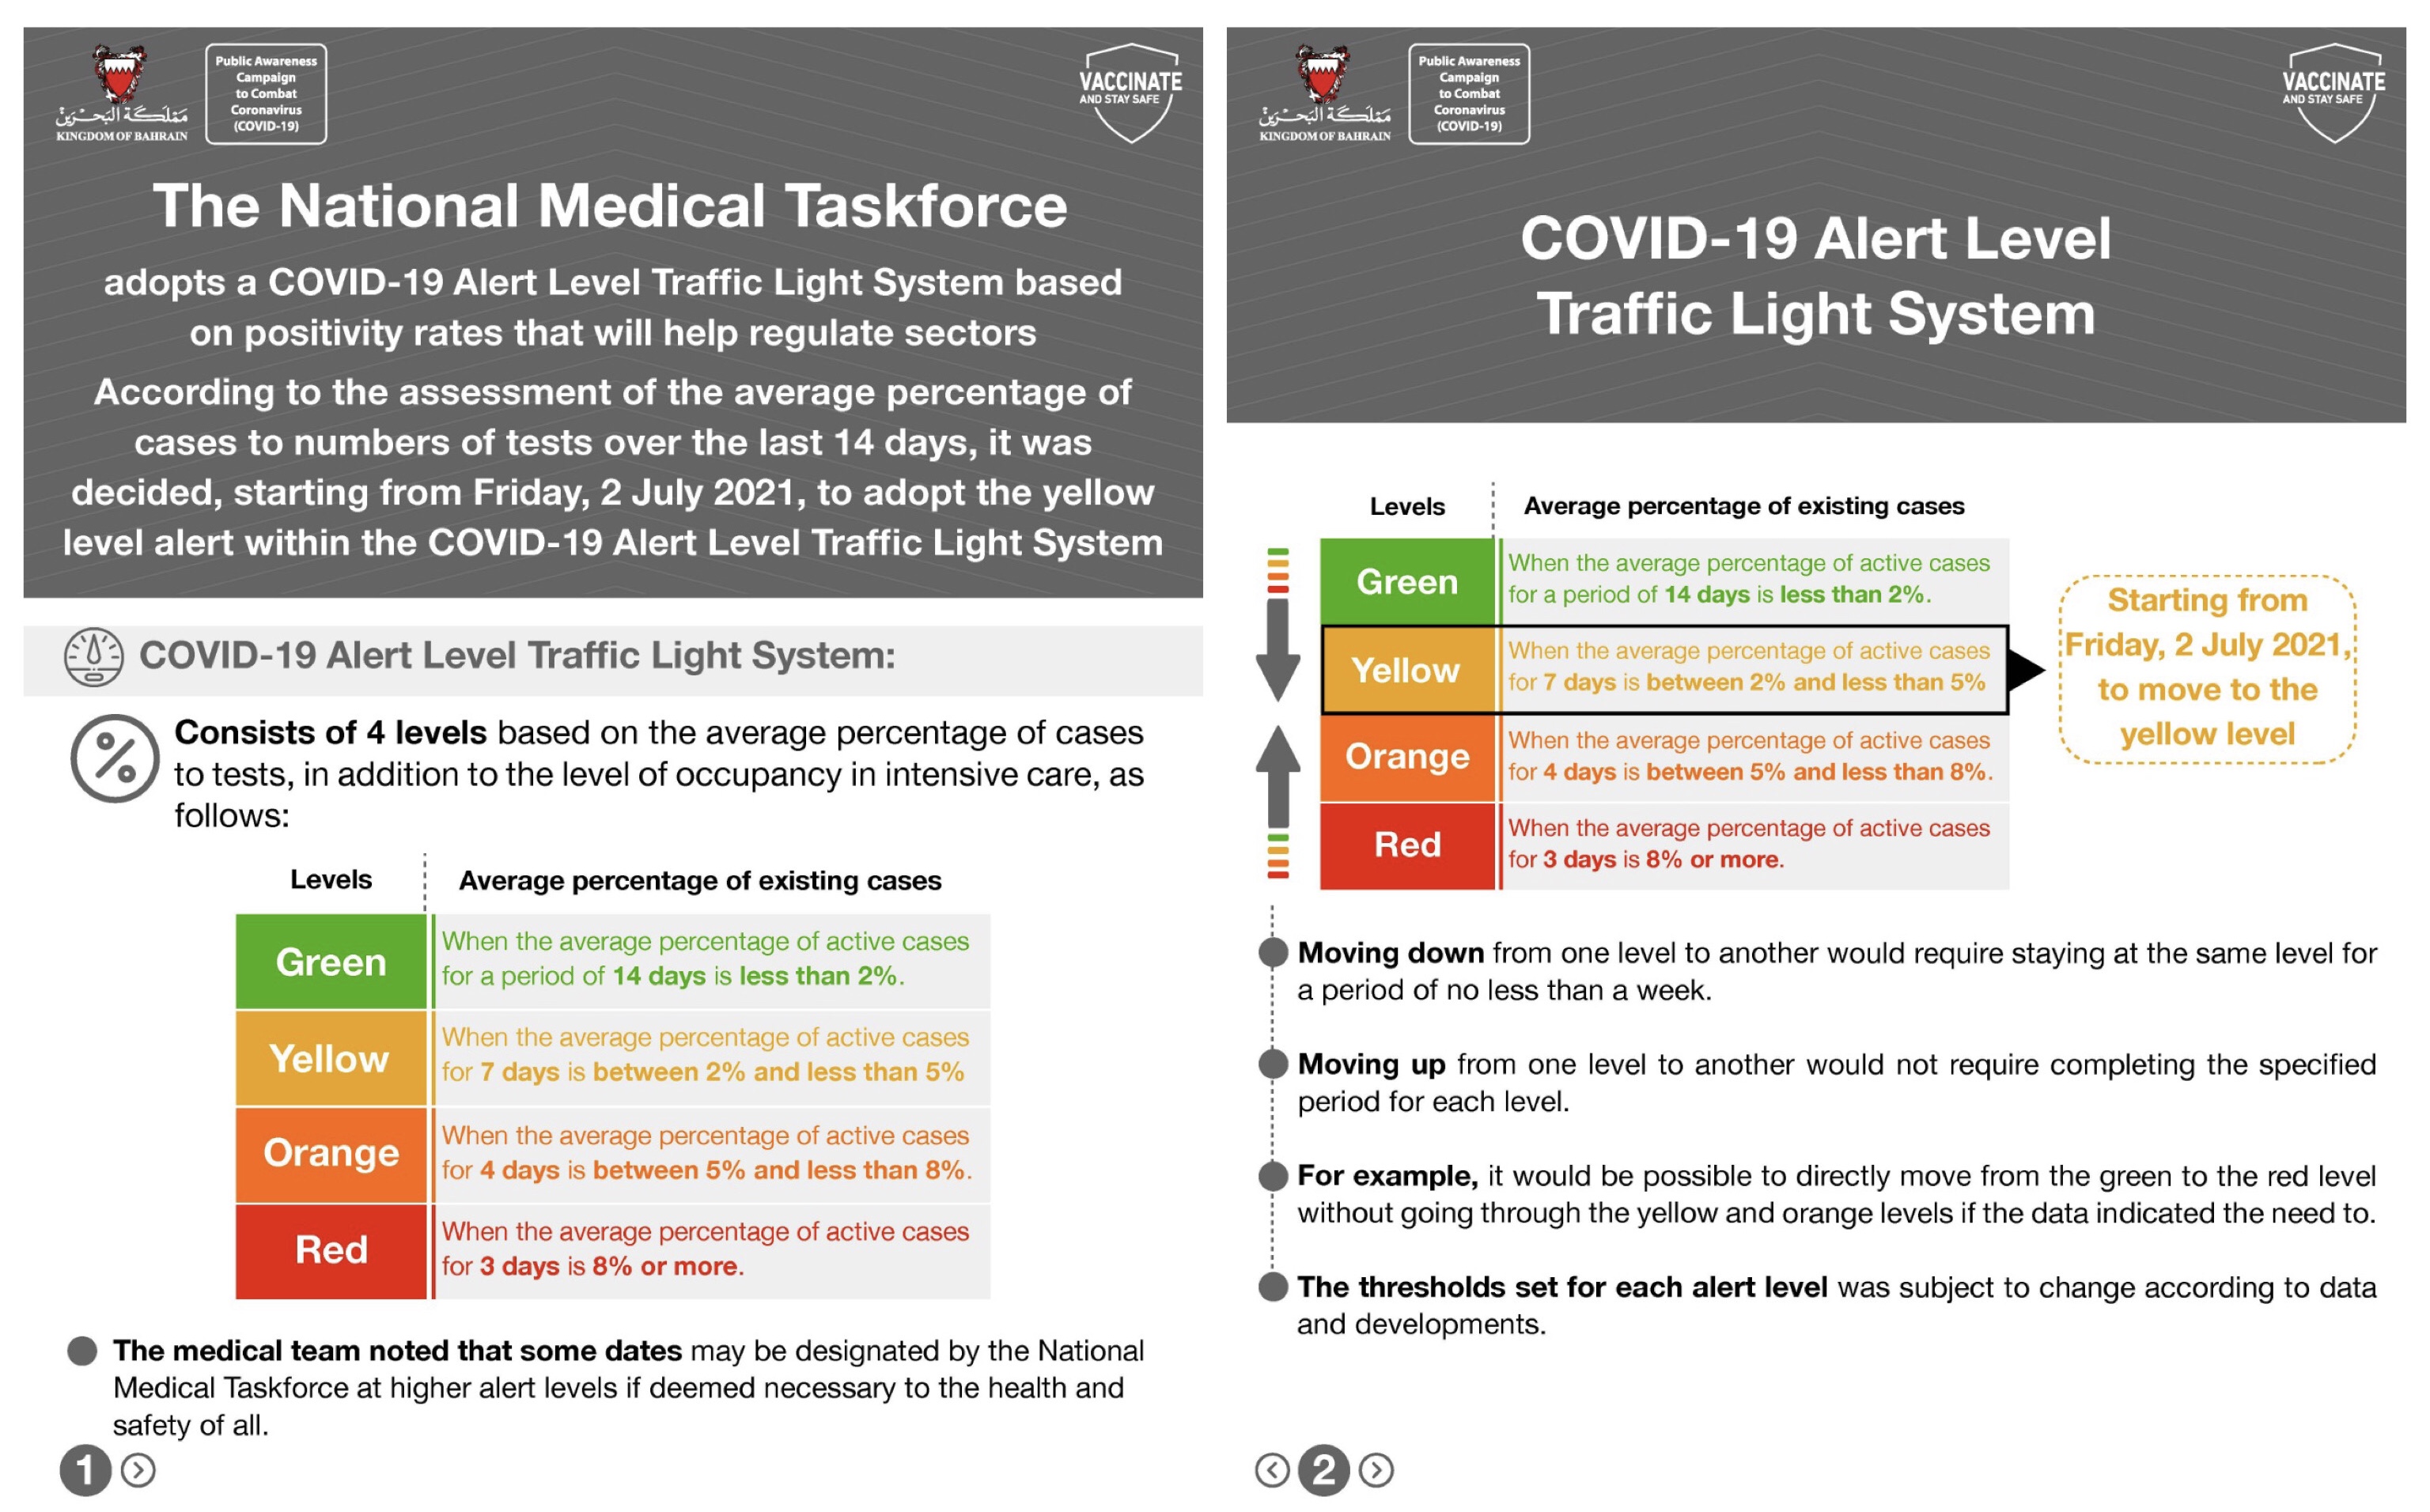 National Medical Taskforce for Combatting the Coronavirus (COVID-19) adopts a COVID-19 Alert Level Traffic Light System based on positivity rate across various sectors